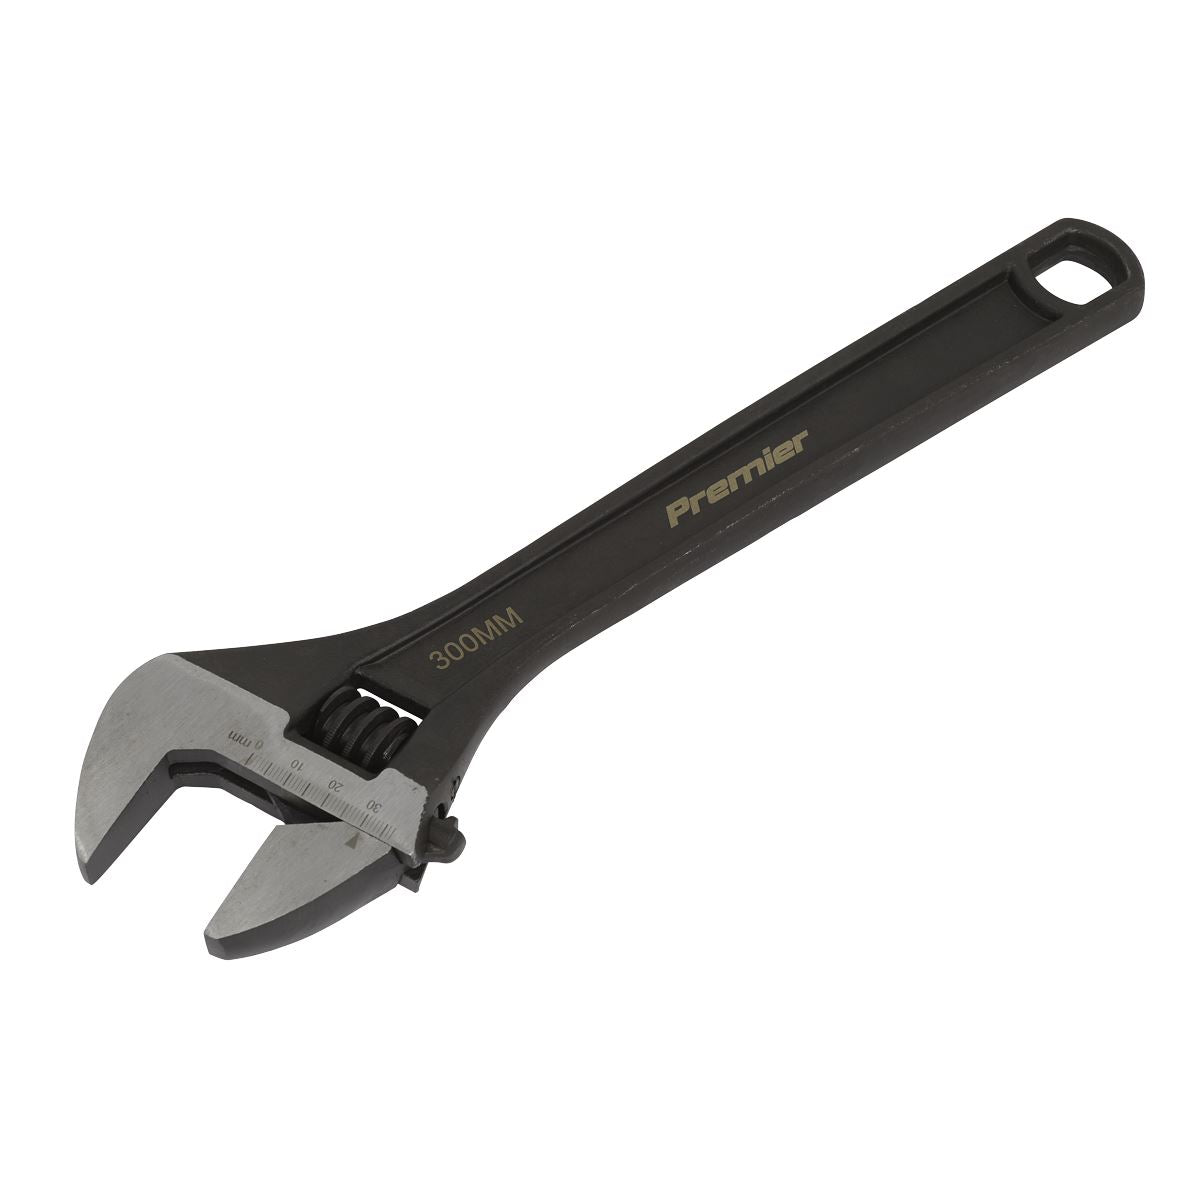 Sealey Premier Adjustable Wrench 300mm Jaw Capacity 34mm